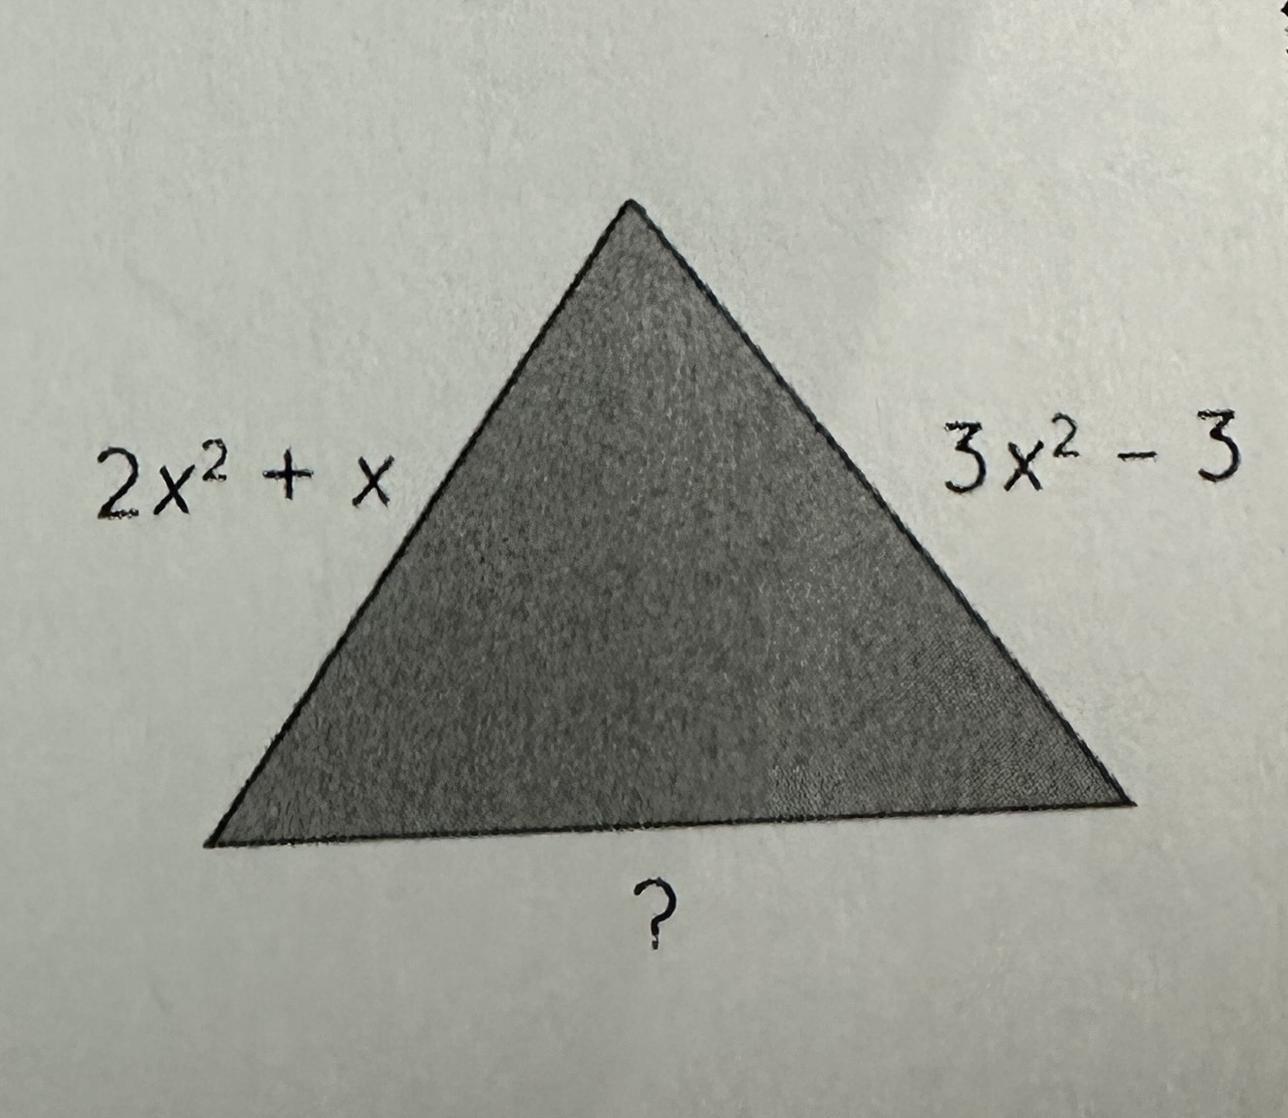 The Perimeter Of The Given Triangle Is 3x + 2 Unitsand Its Two Sides Are Given In The Figure. Find Itsthird